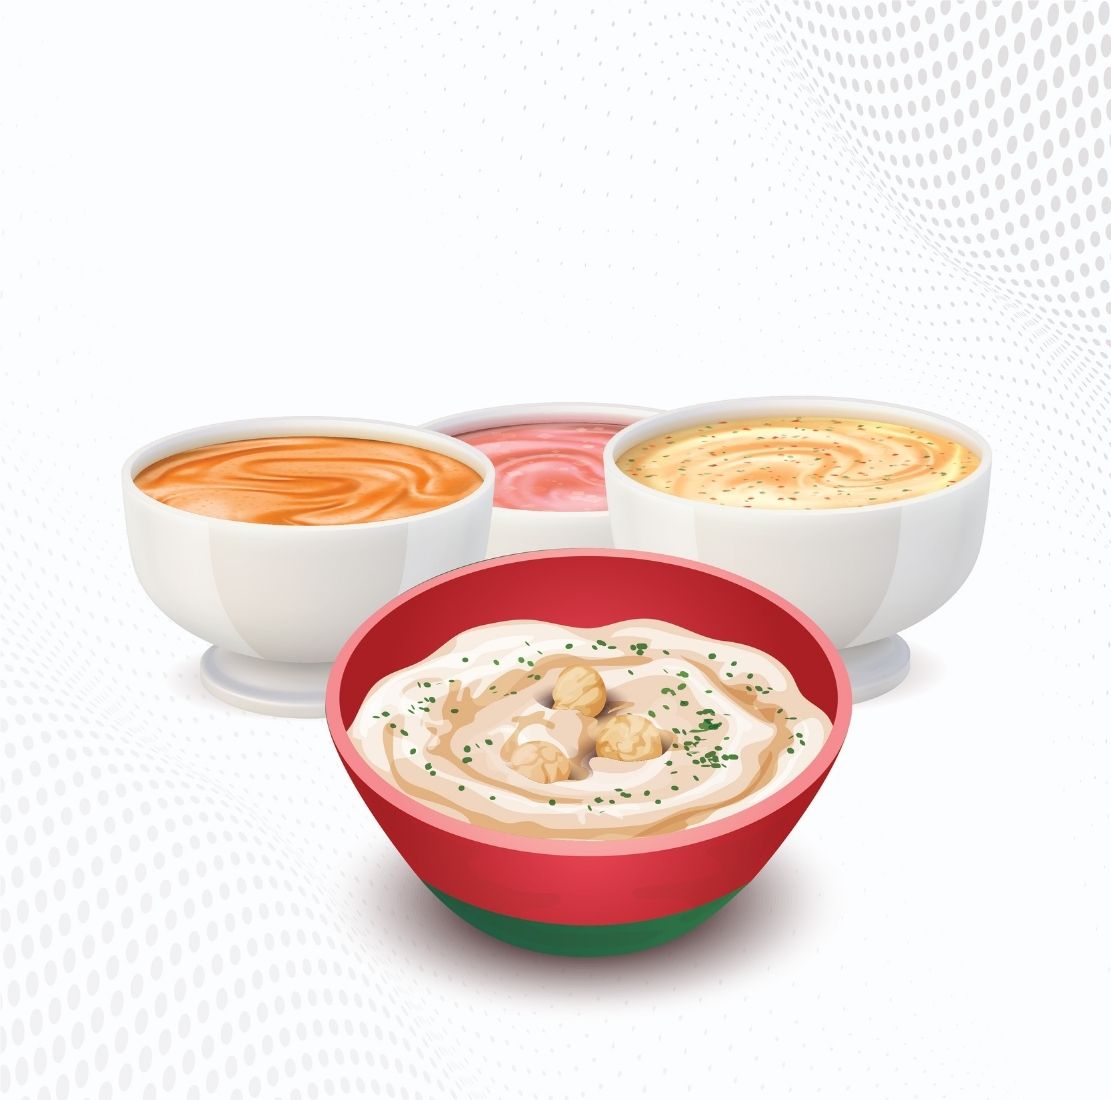 HUMMUS COMES IN DIFFERENT FLAVORS